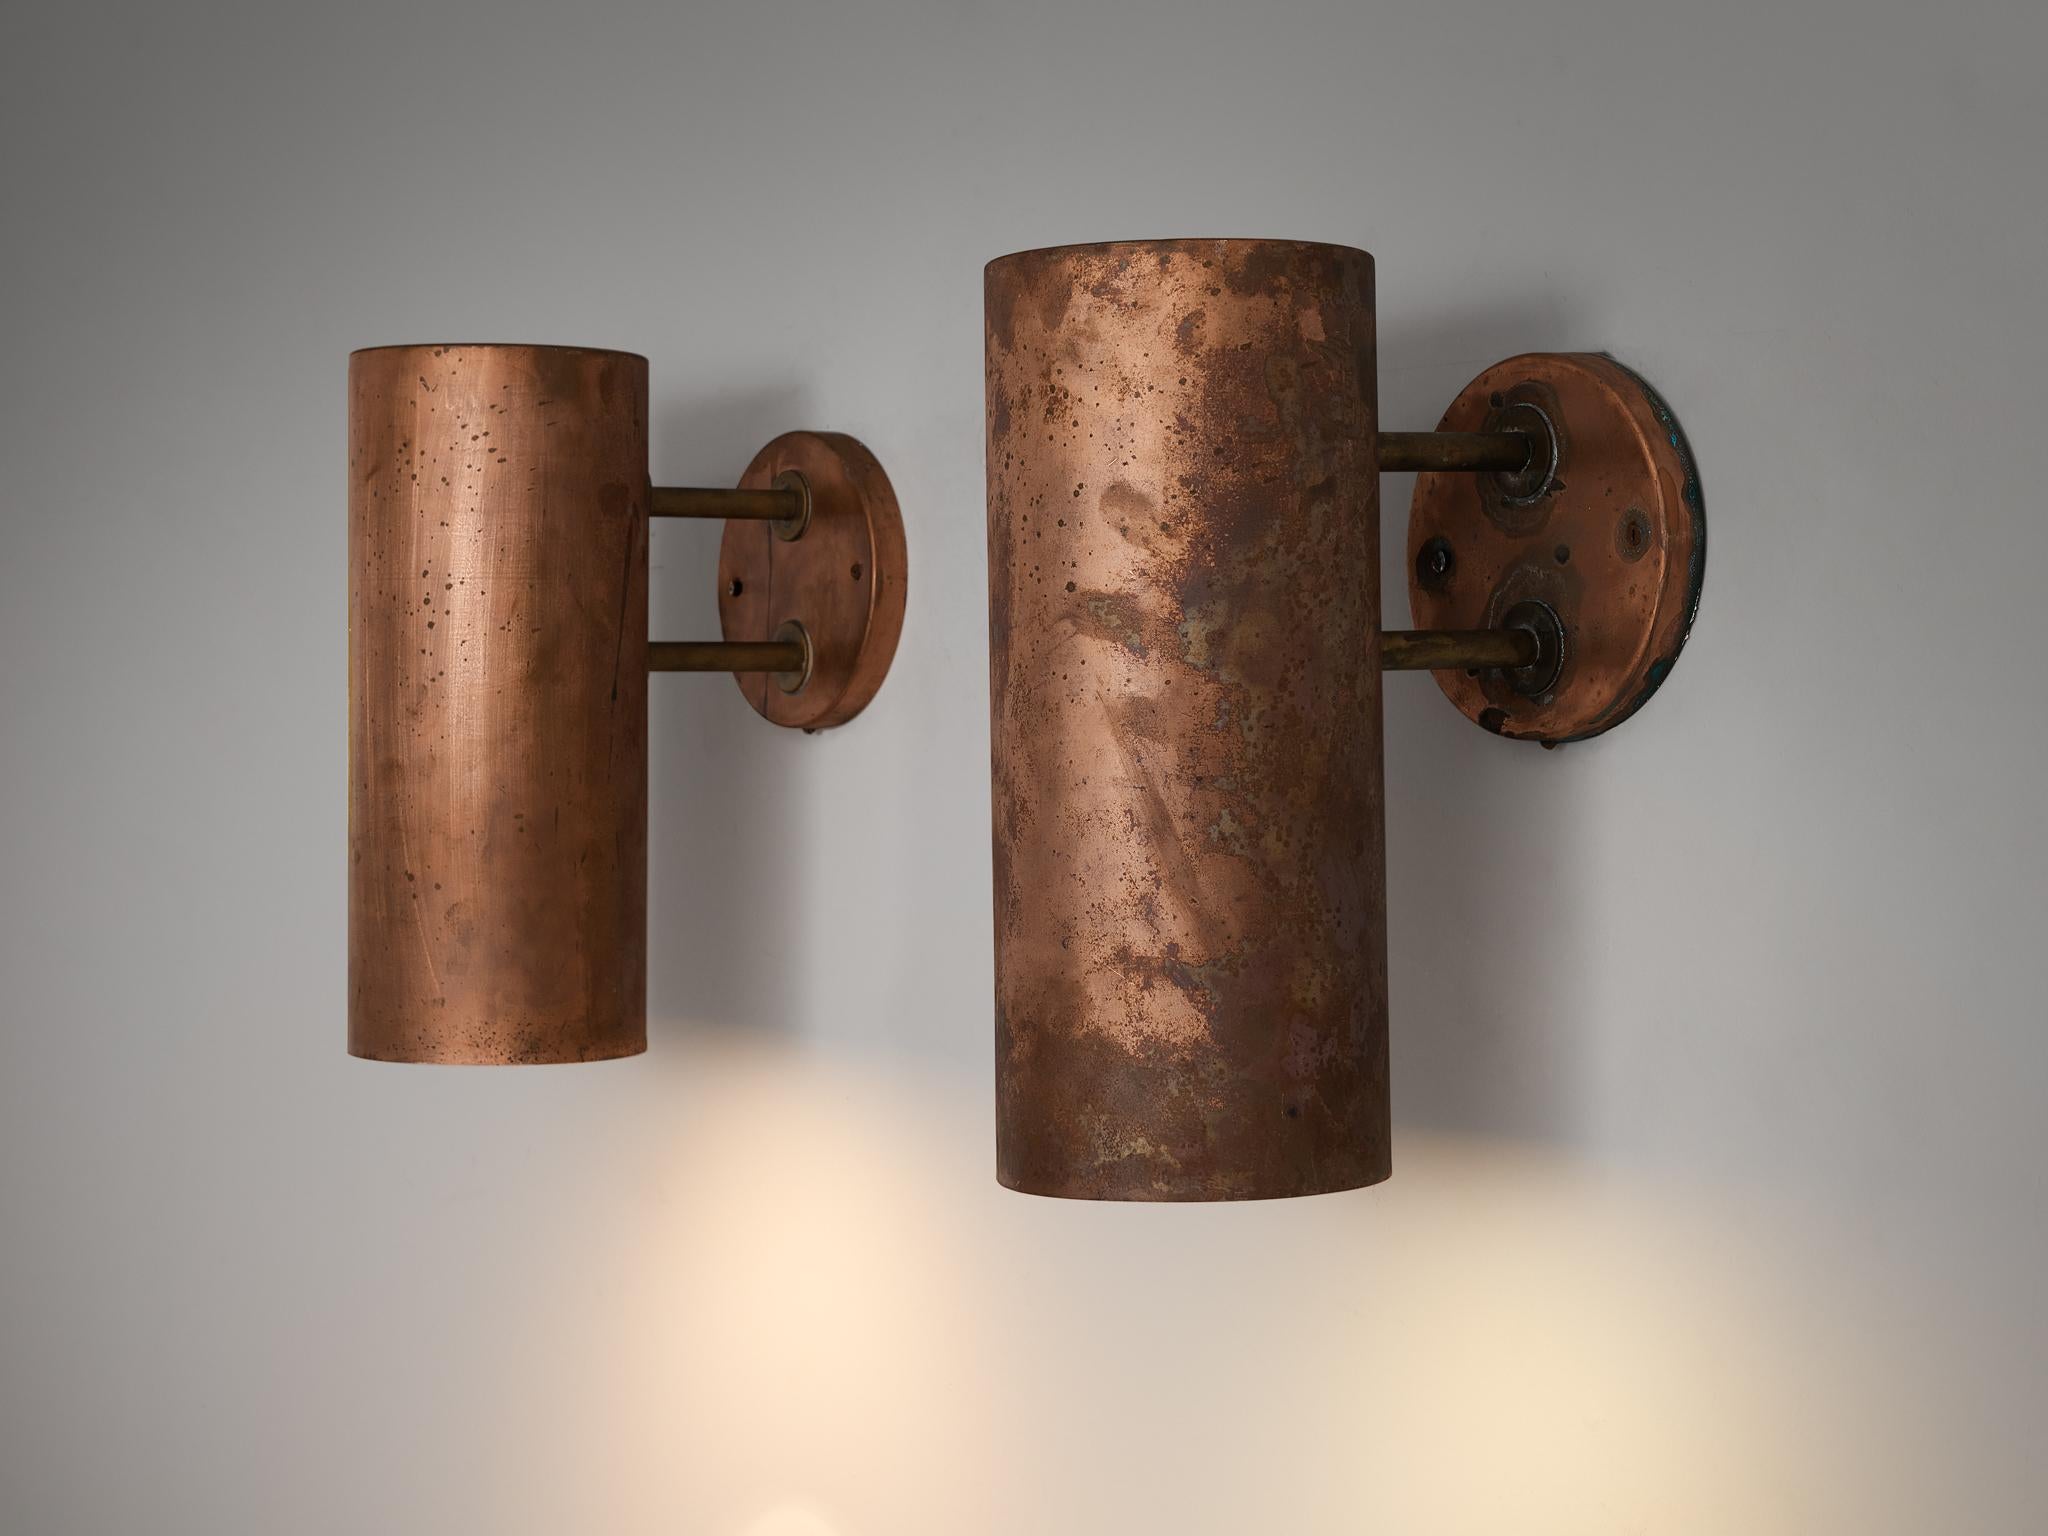 Hans-Agne Jakobsson for Hans-Agne Jakobsson AB in Markaryd, ‘Rulle’ wall lights, copper, Sweden, 1960s.

Beautiful orange copper ‘Rulle’ outdoor lights by Swedish designer Hans-Agne Jakobsson. These lights feature a cylindric lampshade that is